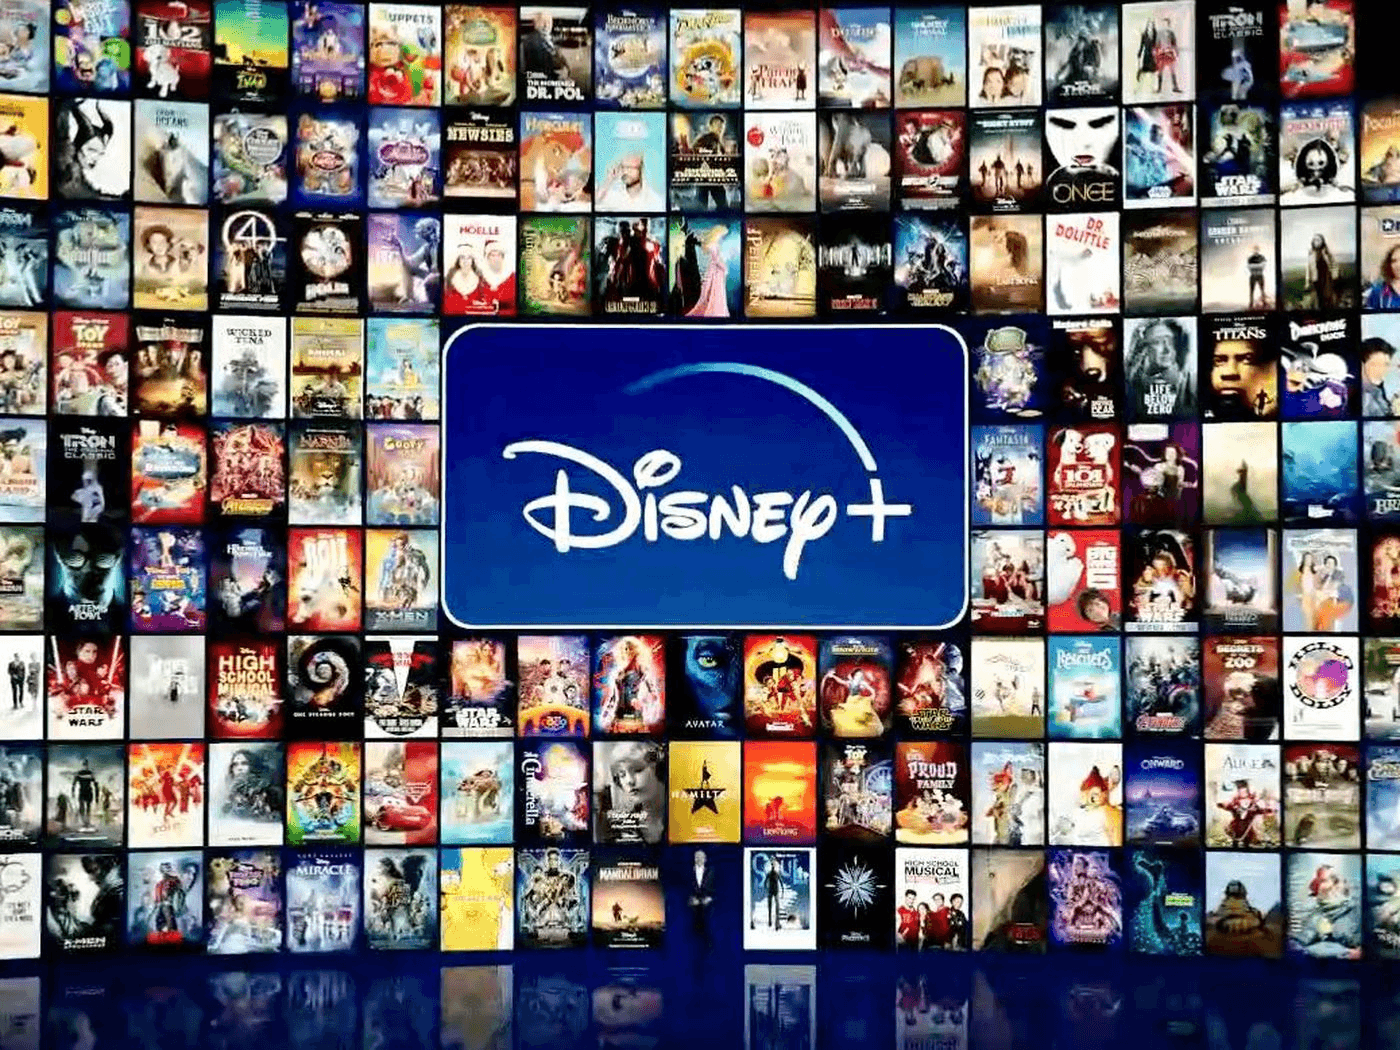 Disney, National Geographic, Marvel, Pixar and Star wars accounts all in one place. 